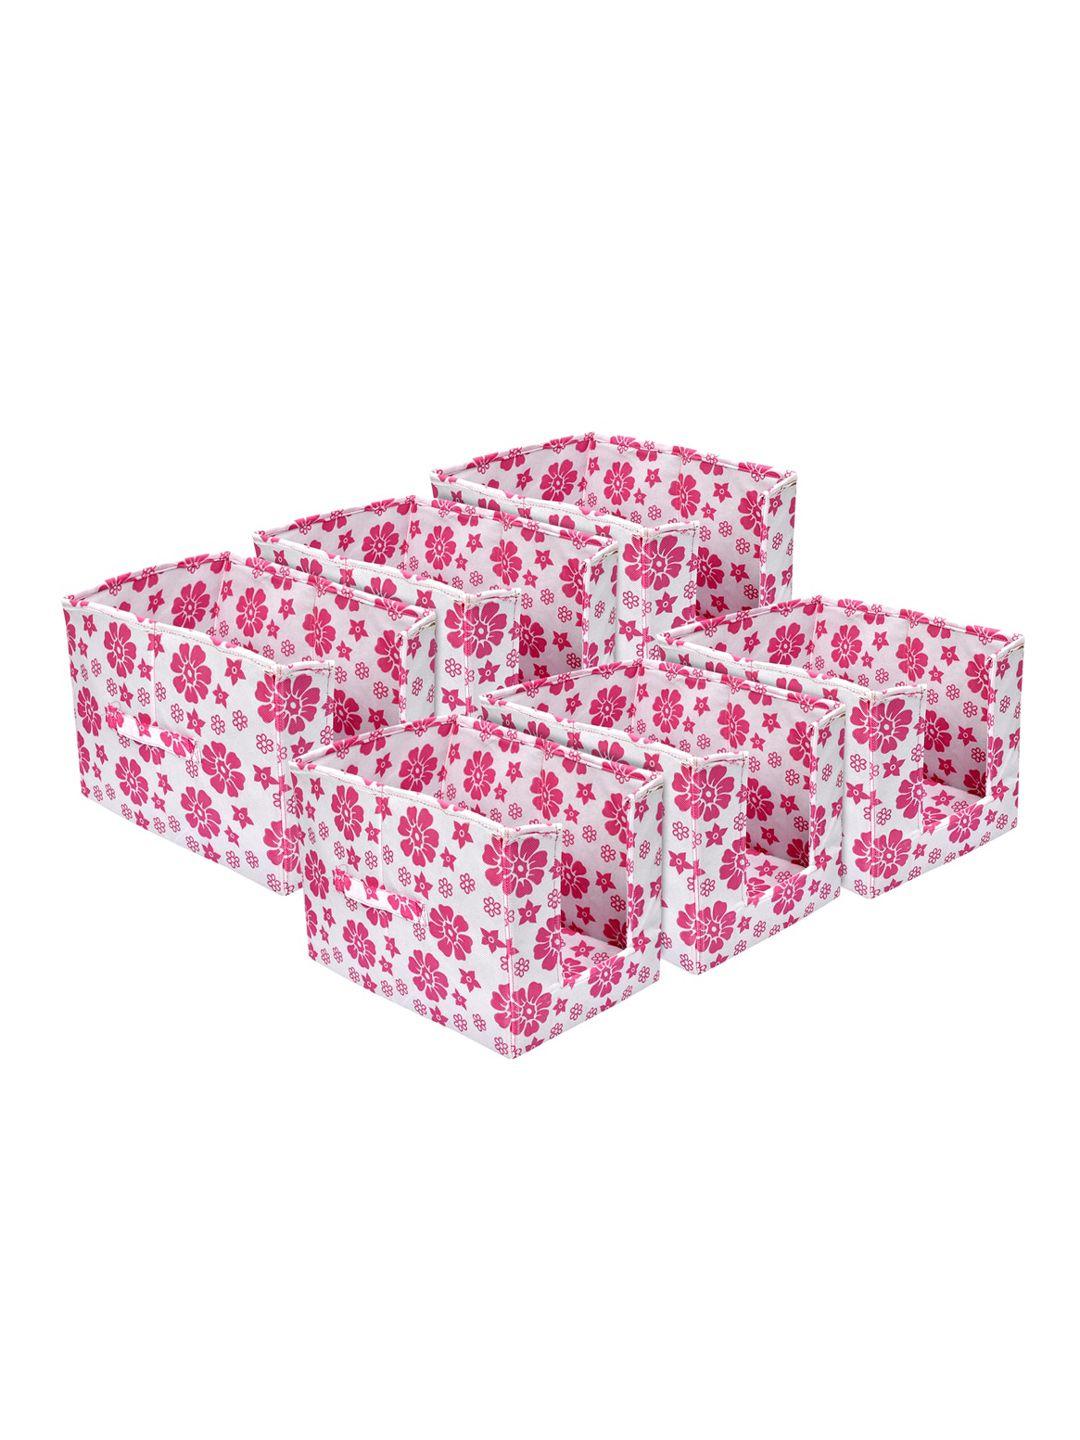 kuber industries set of 6 white & pink flower printed shirt stacker organisers with handles